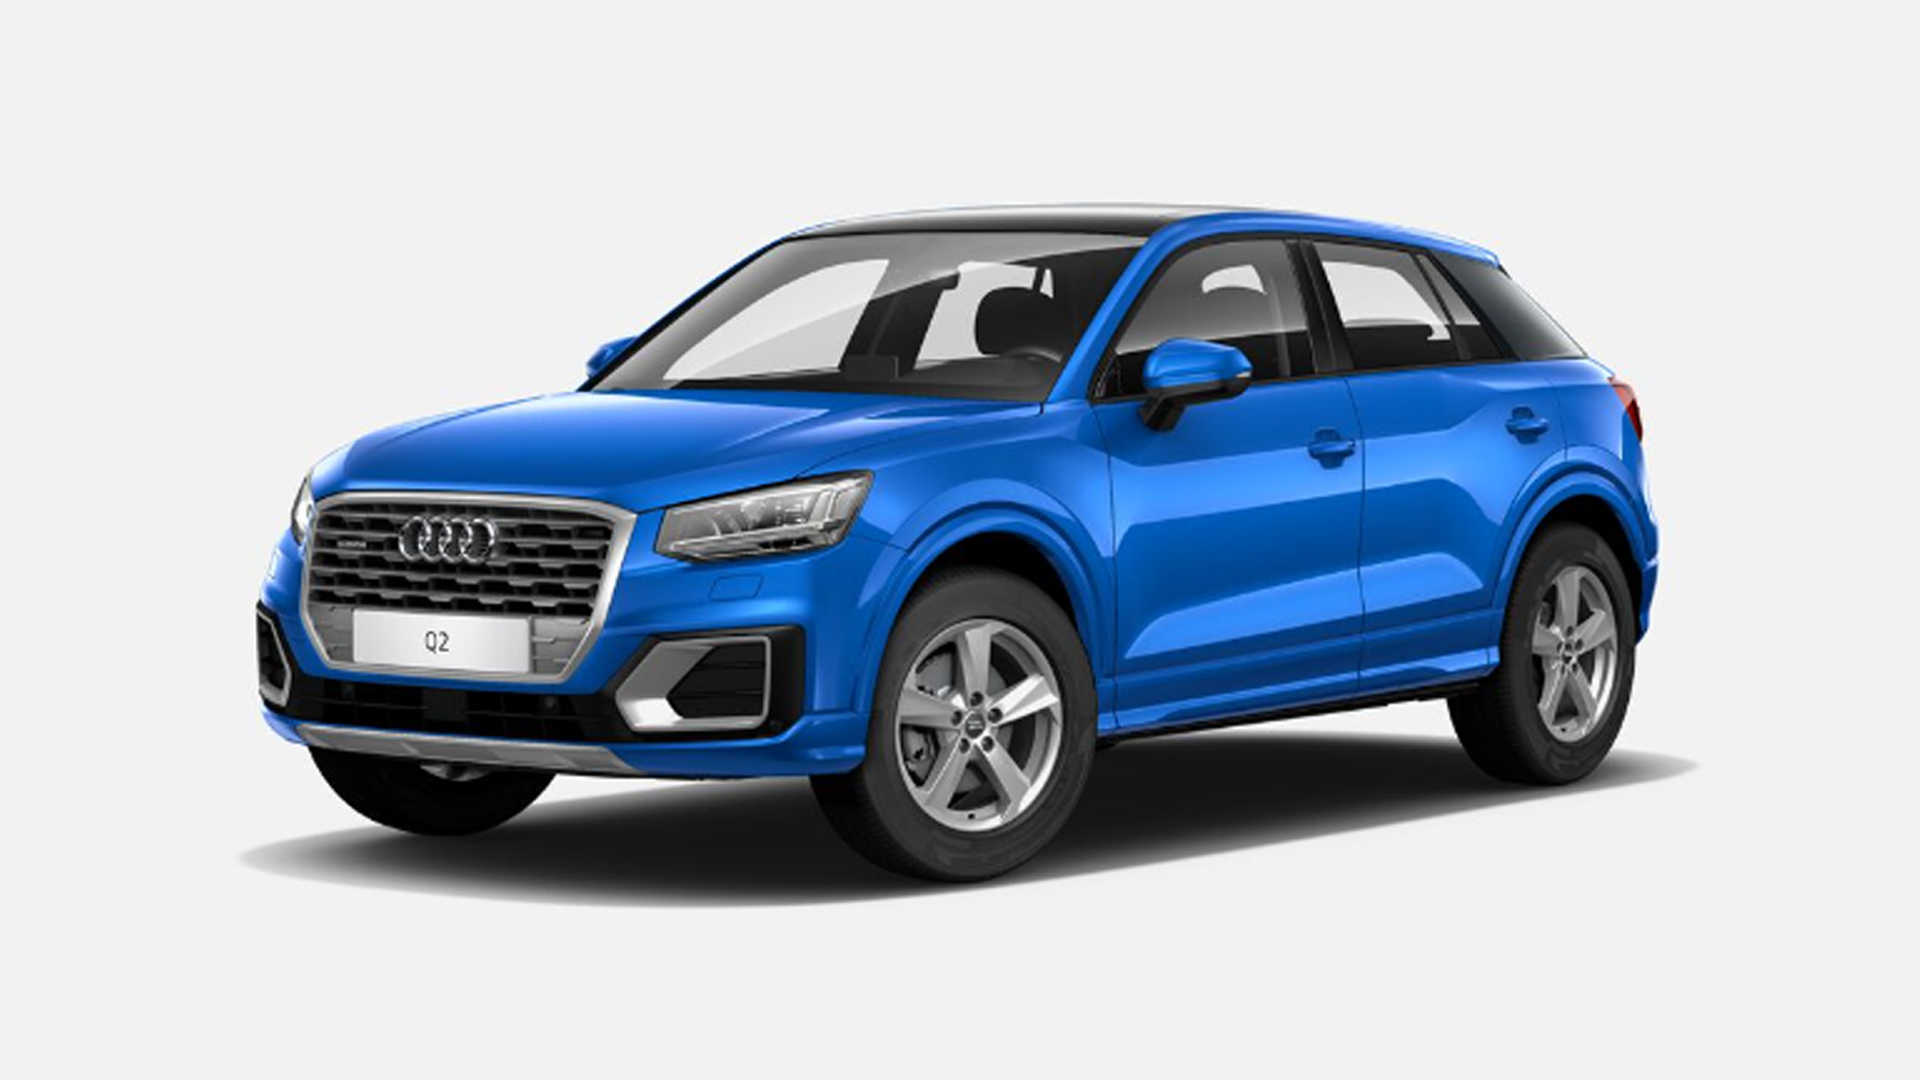 Why should you buy an old Audi Q2?